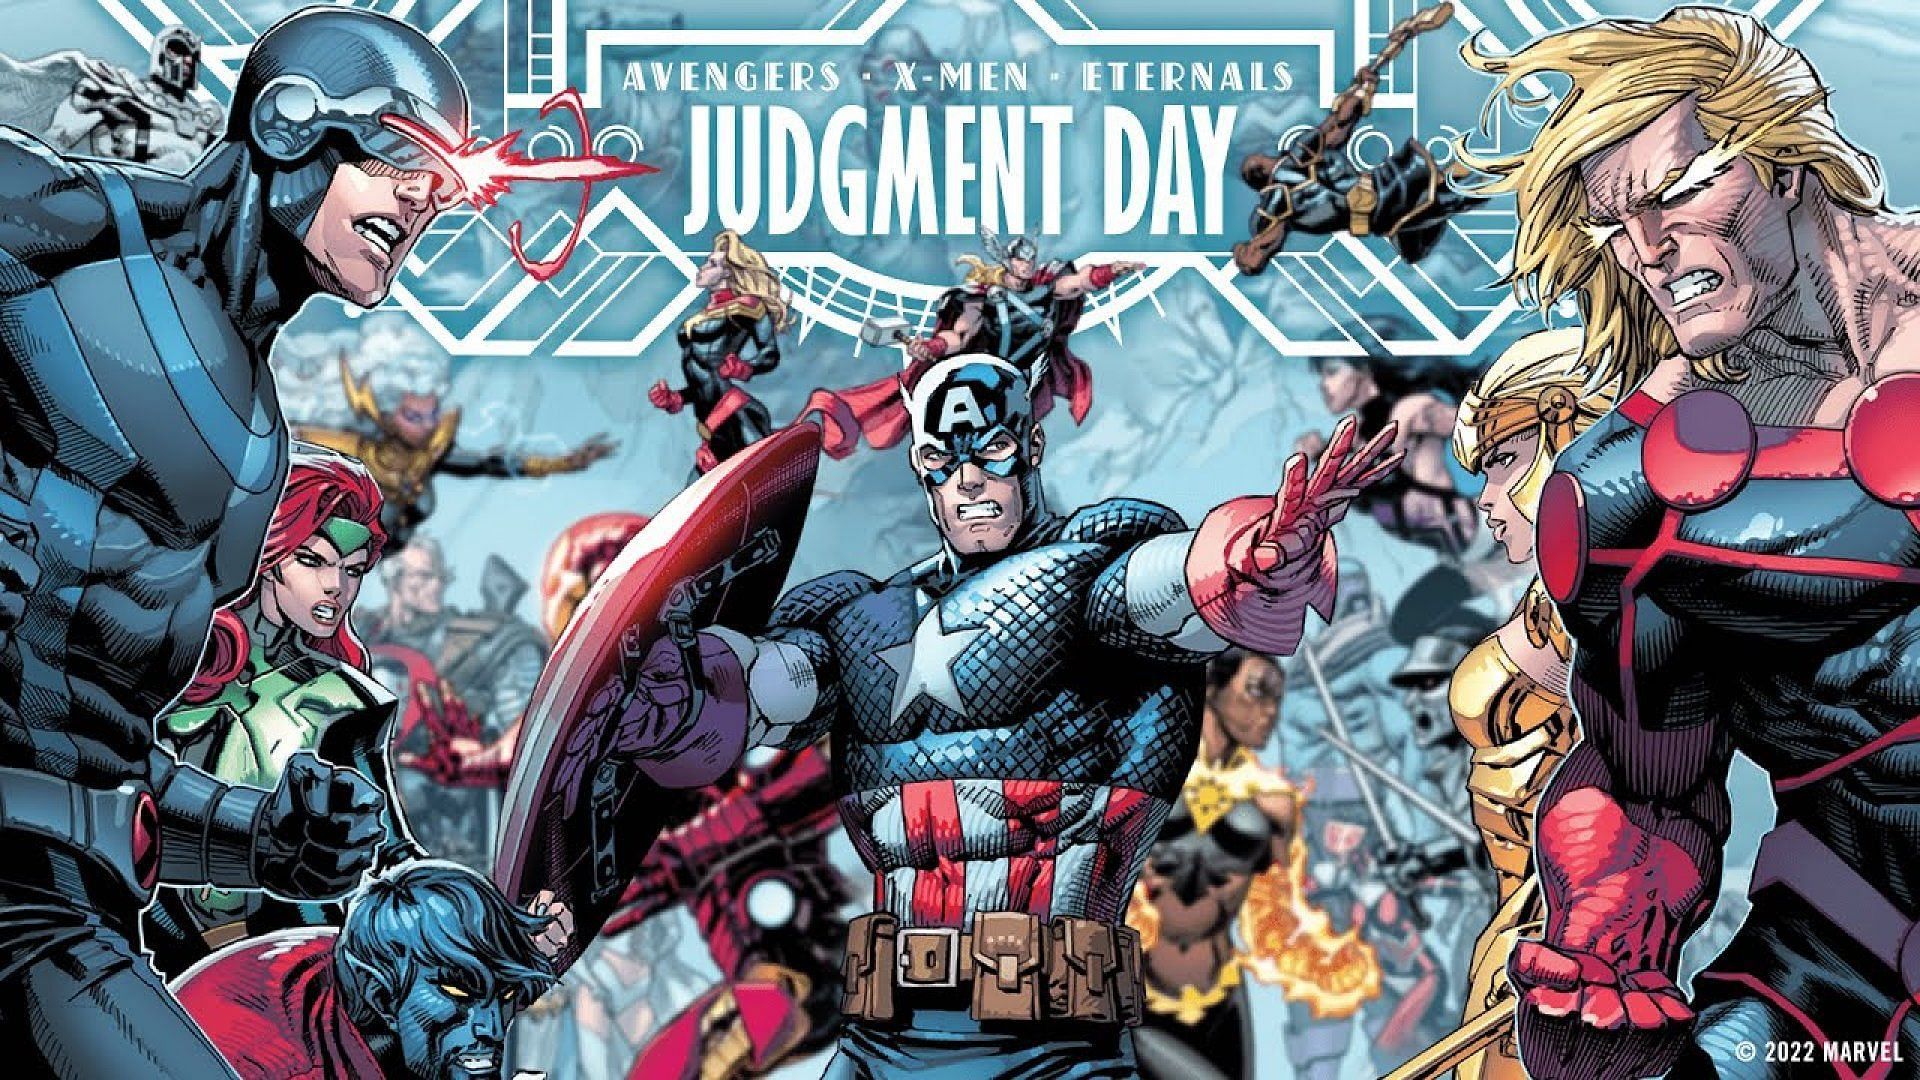 Avengers Vs X Men Vs Eternals All You Need To Know About Marvel S Judgment Day 22 Series